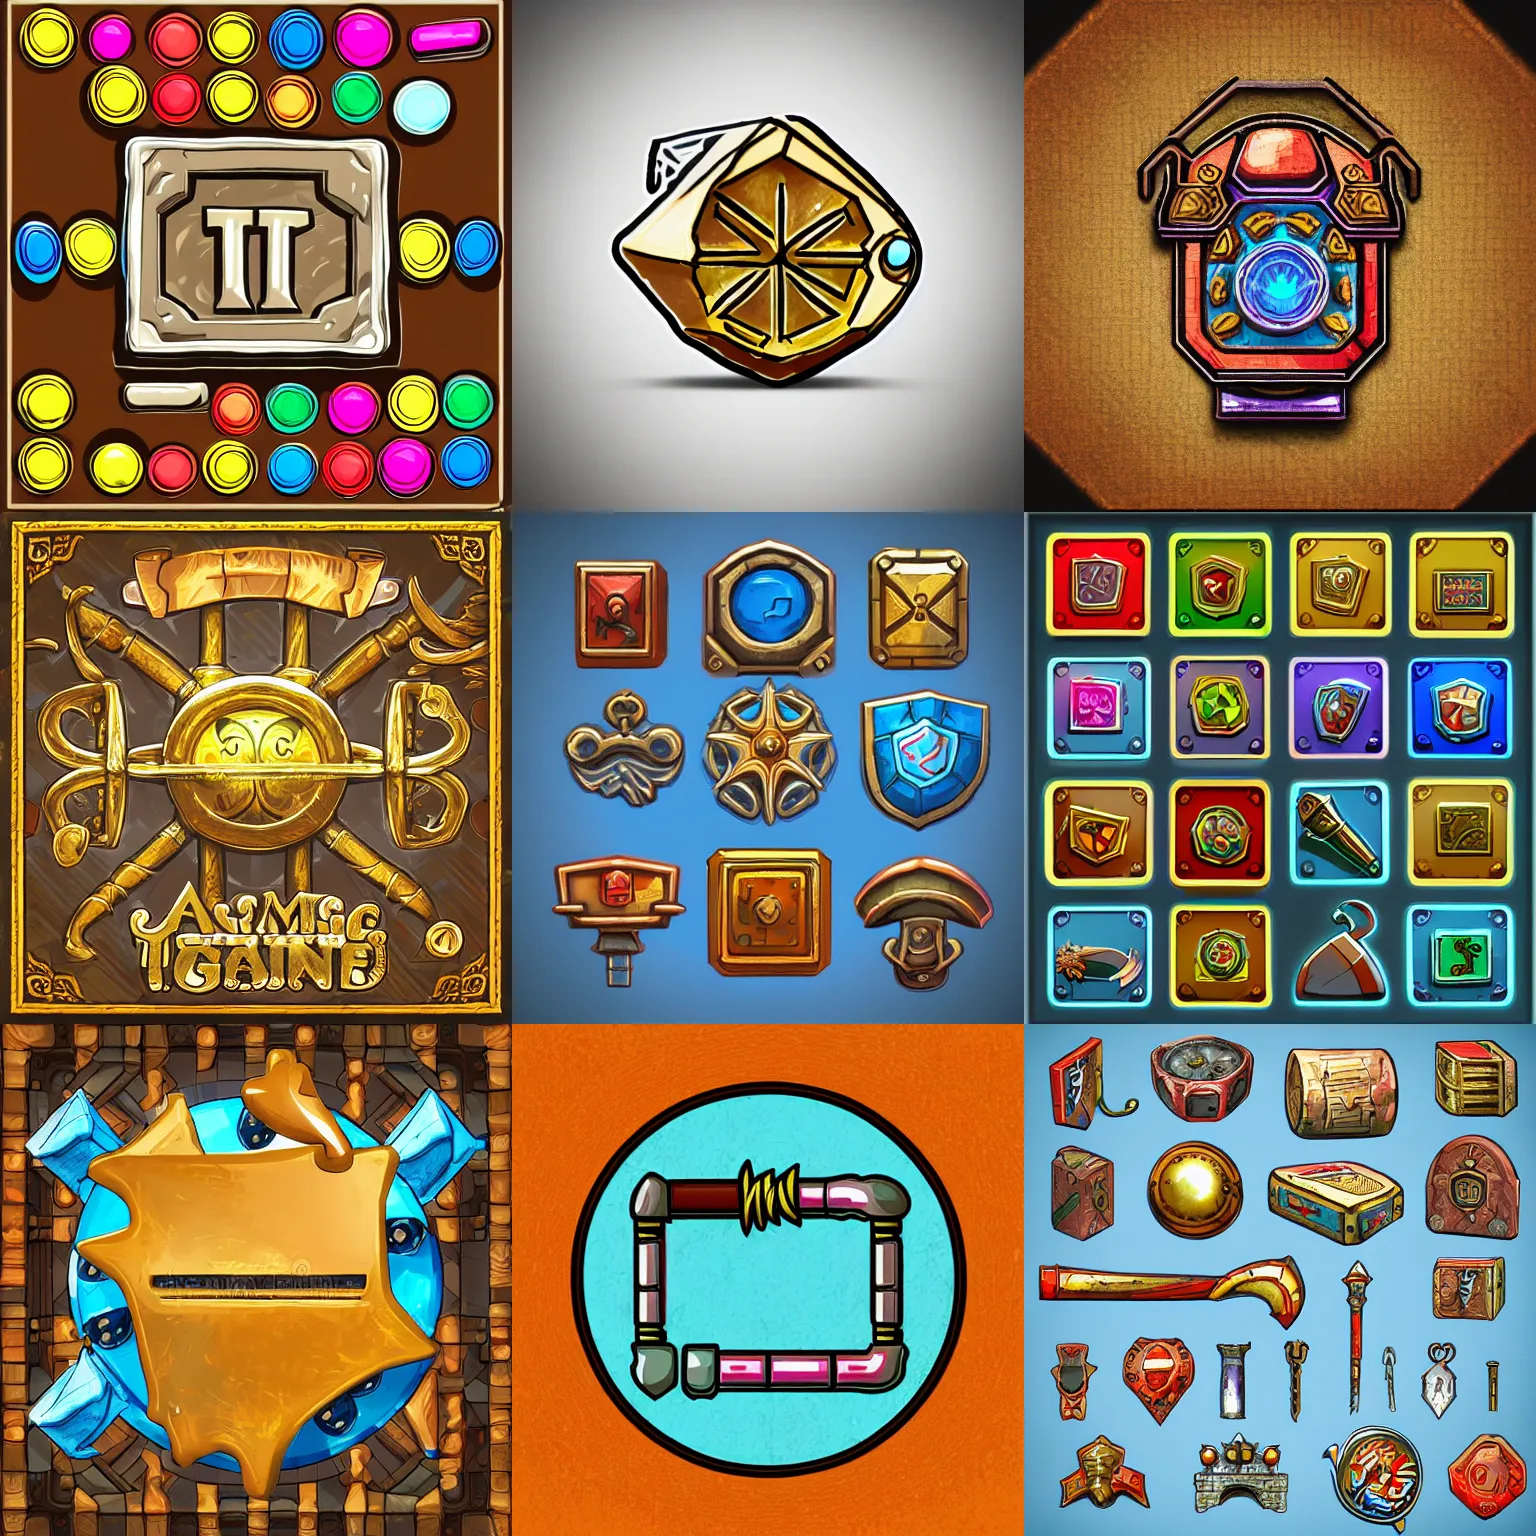 Prompt: a game icon item key, detailed illustration of an object with handpainted textures, rpg game style, center, rim lights and glow, colorful, high depth and details